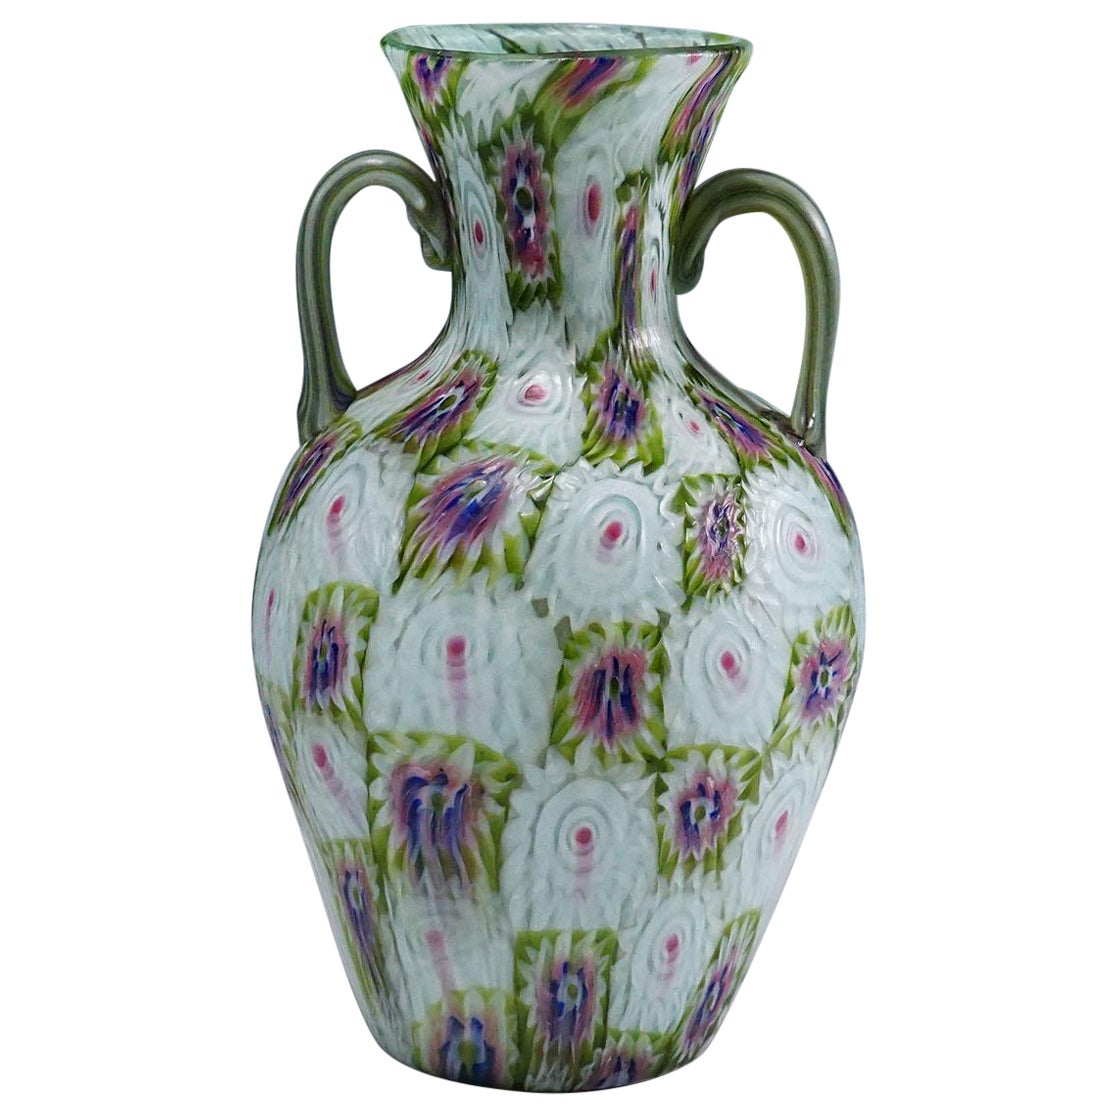 Antique Murrine Vase with Handles, Fratelli Toso Murano ca. 1920s For Sale